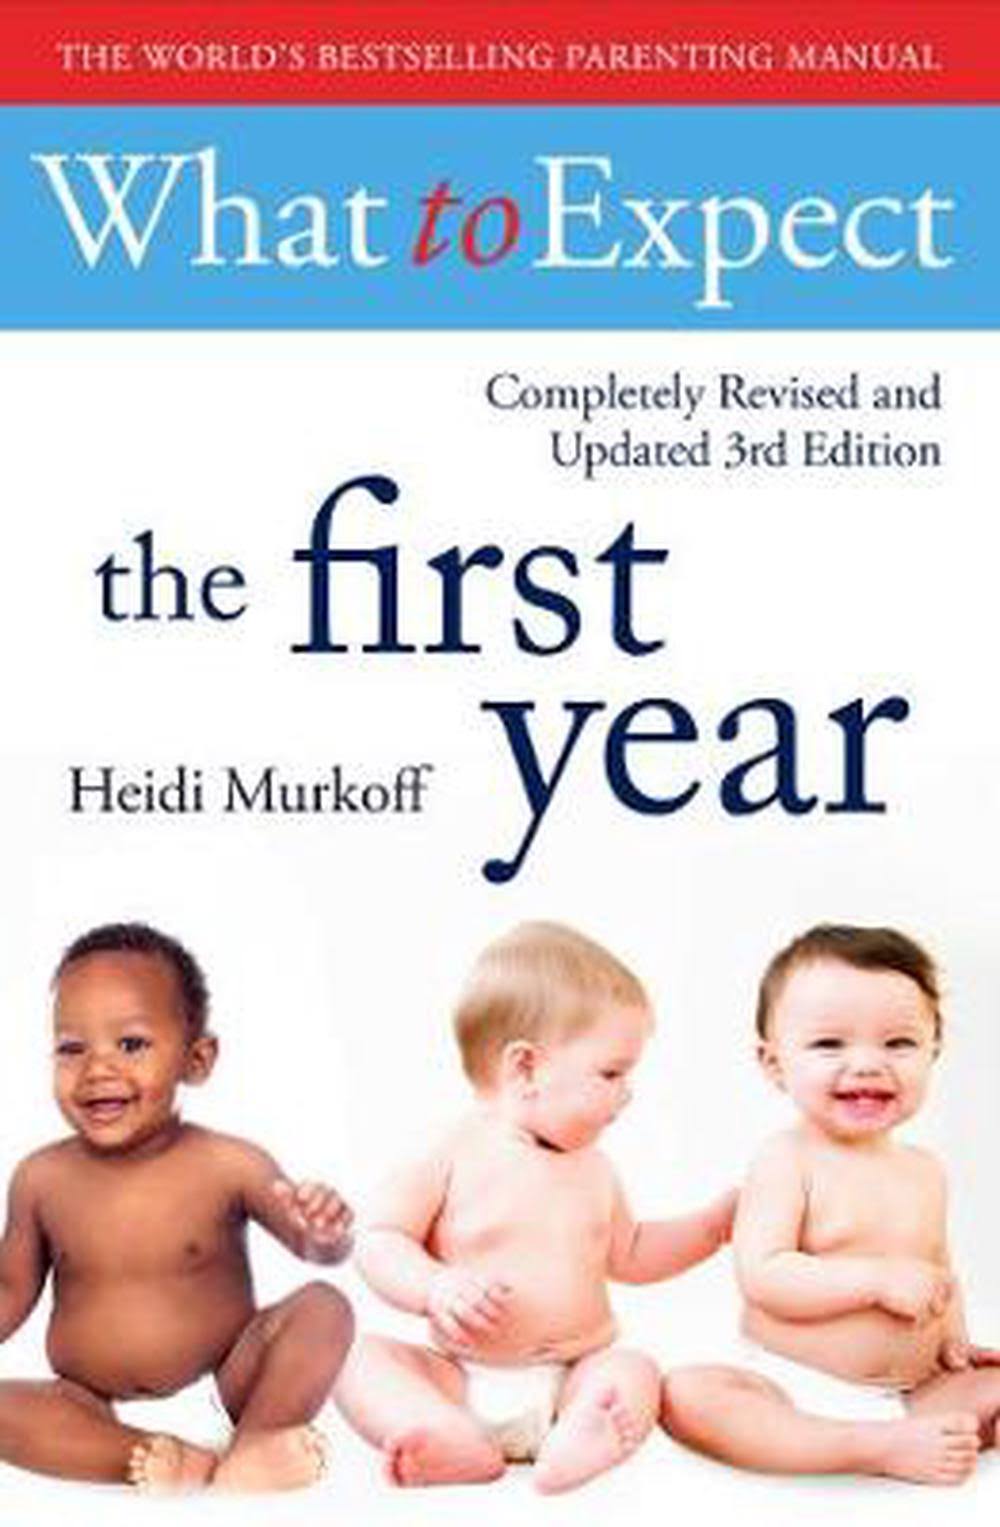 What To Expect The 1st Year 3rd Edition - Heidi Murkoff